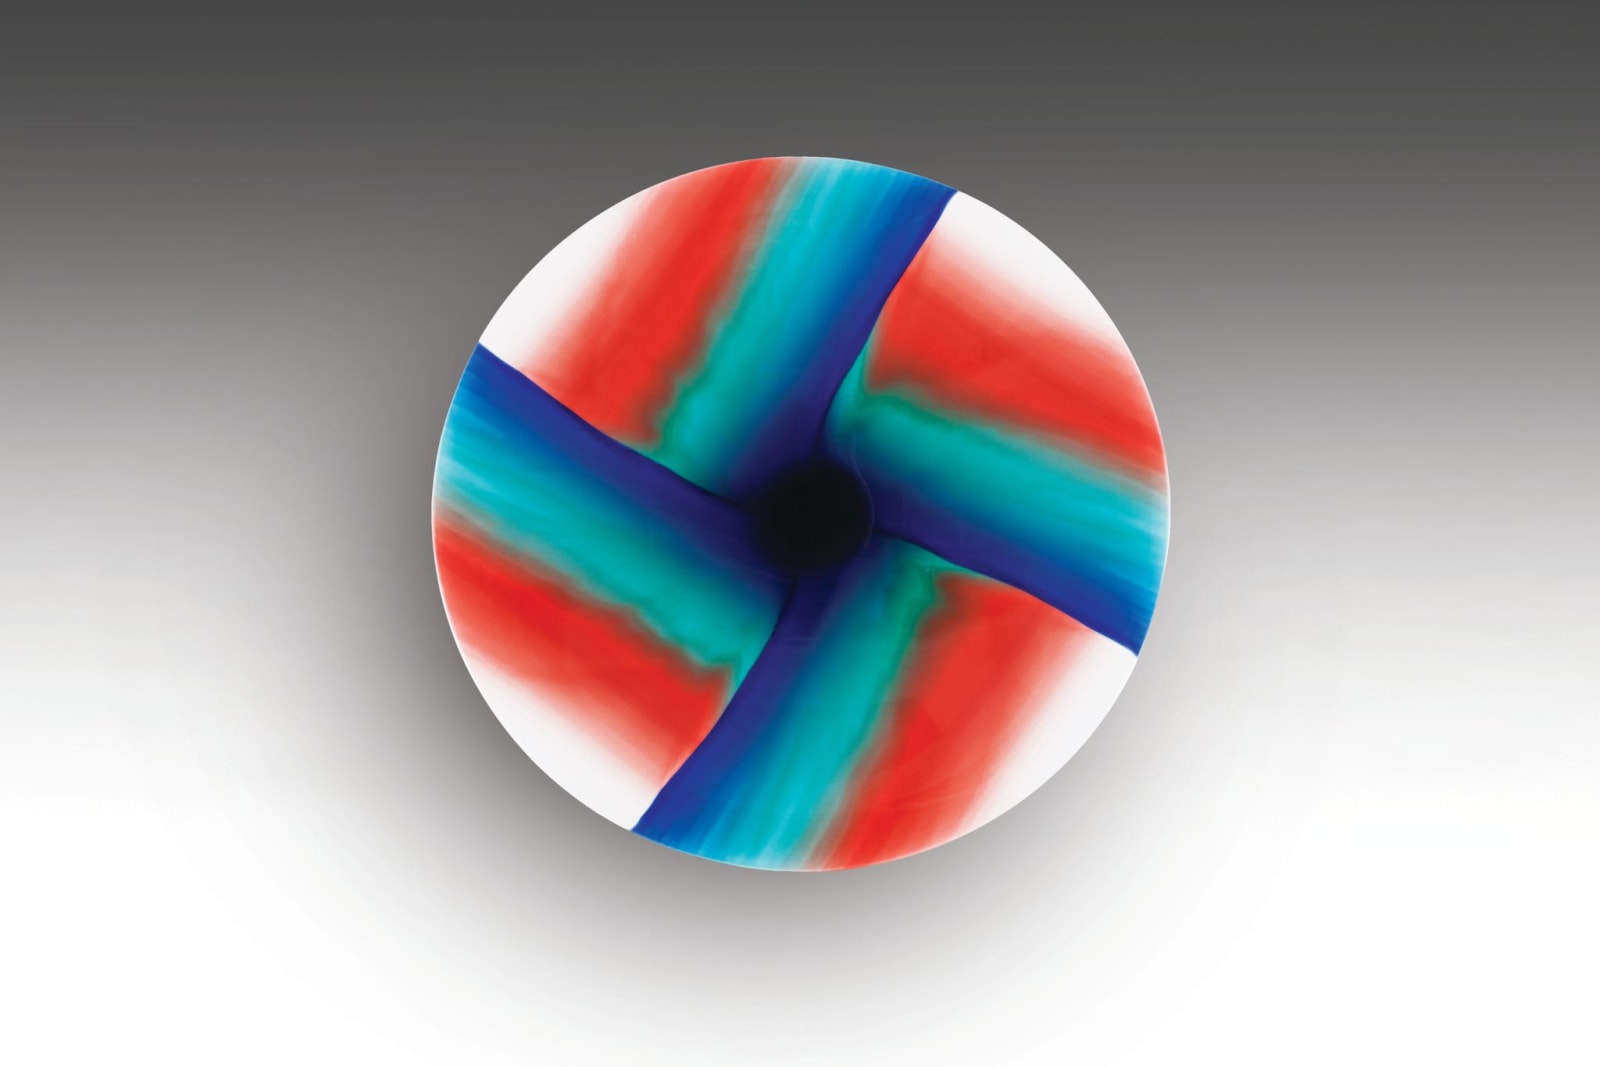 Time and Space, 2015 Porcelain with vivid colored glaze (yôsai) 26 in diameter (66 cm diameter)